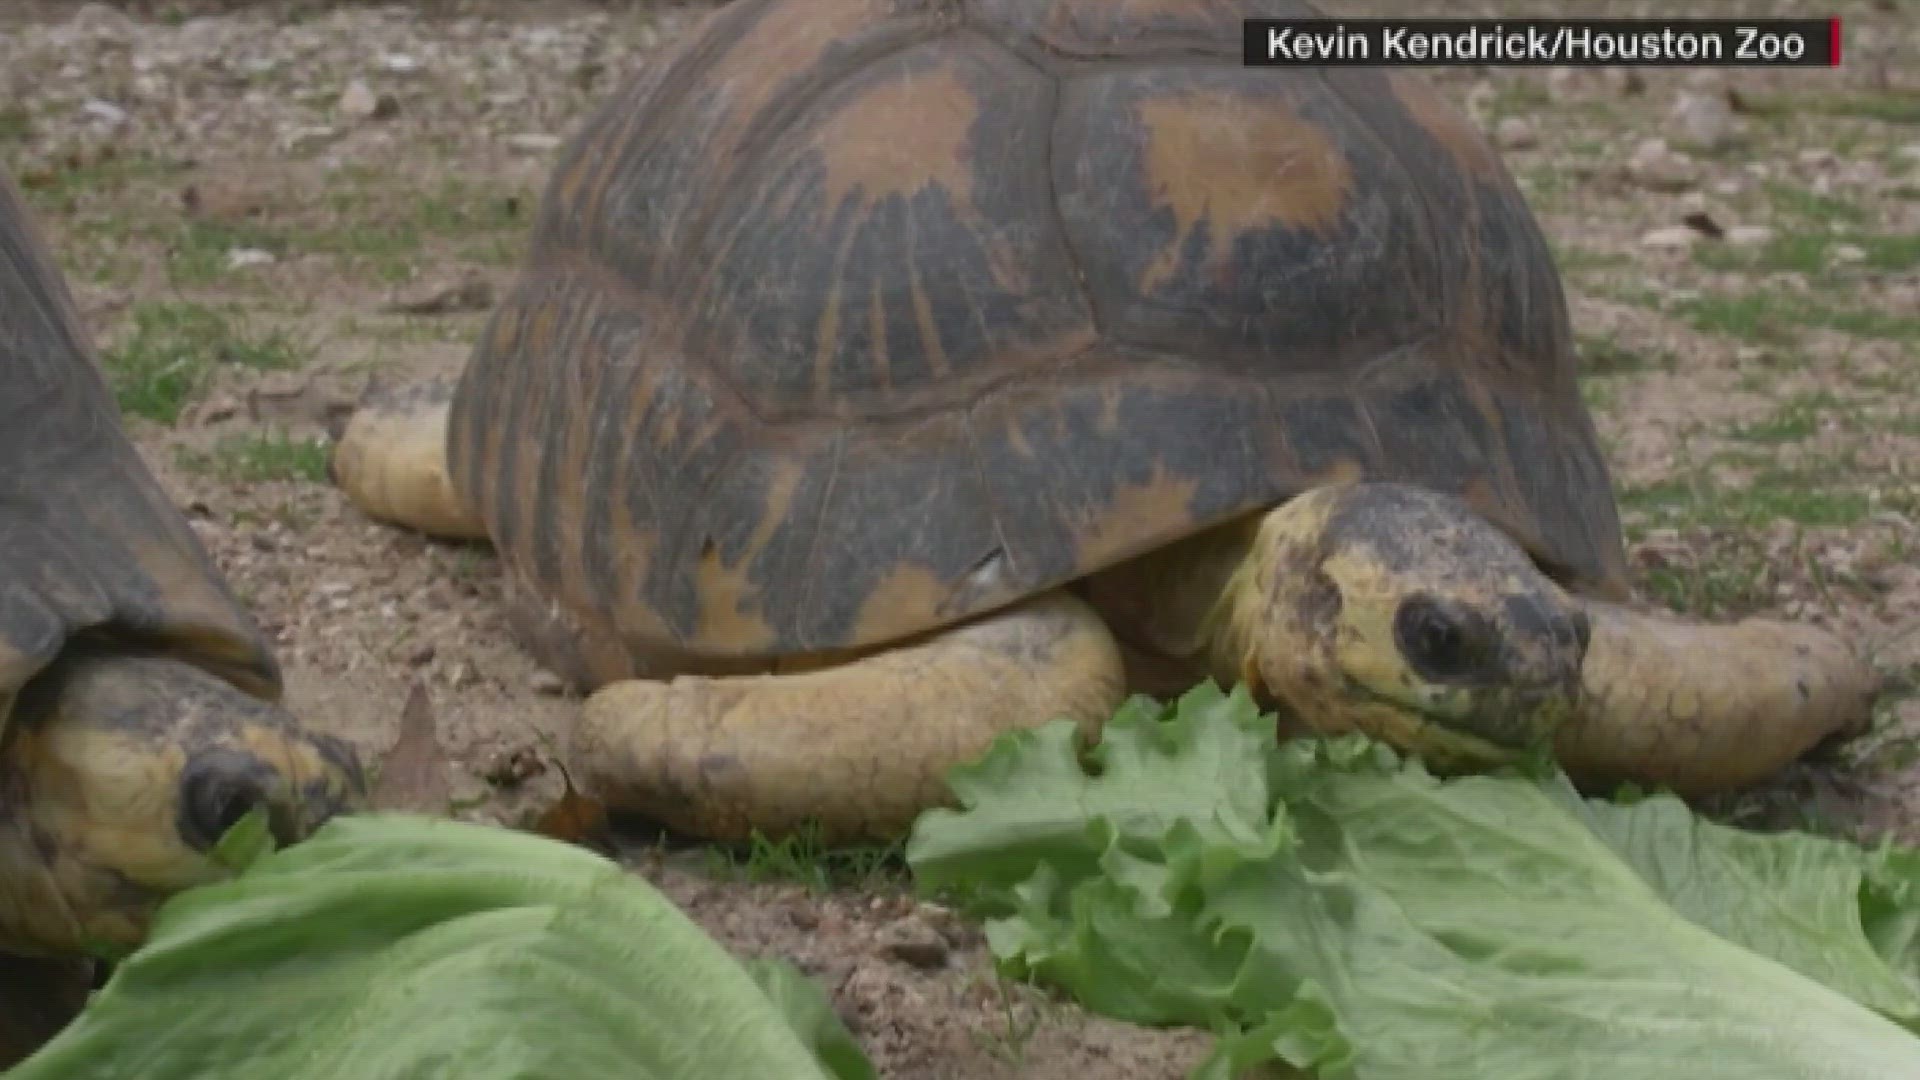 At 90 years old, ‘Mr. Pickles, the tortoise, is the proud dad of three little ones after the three radiated eggs hatched.